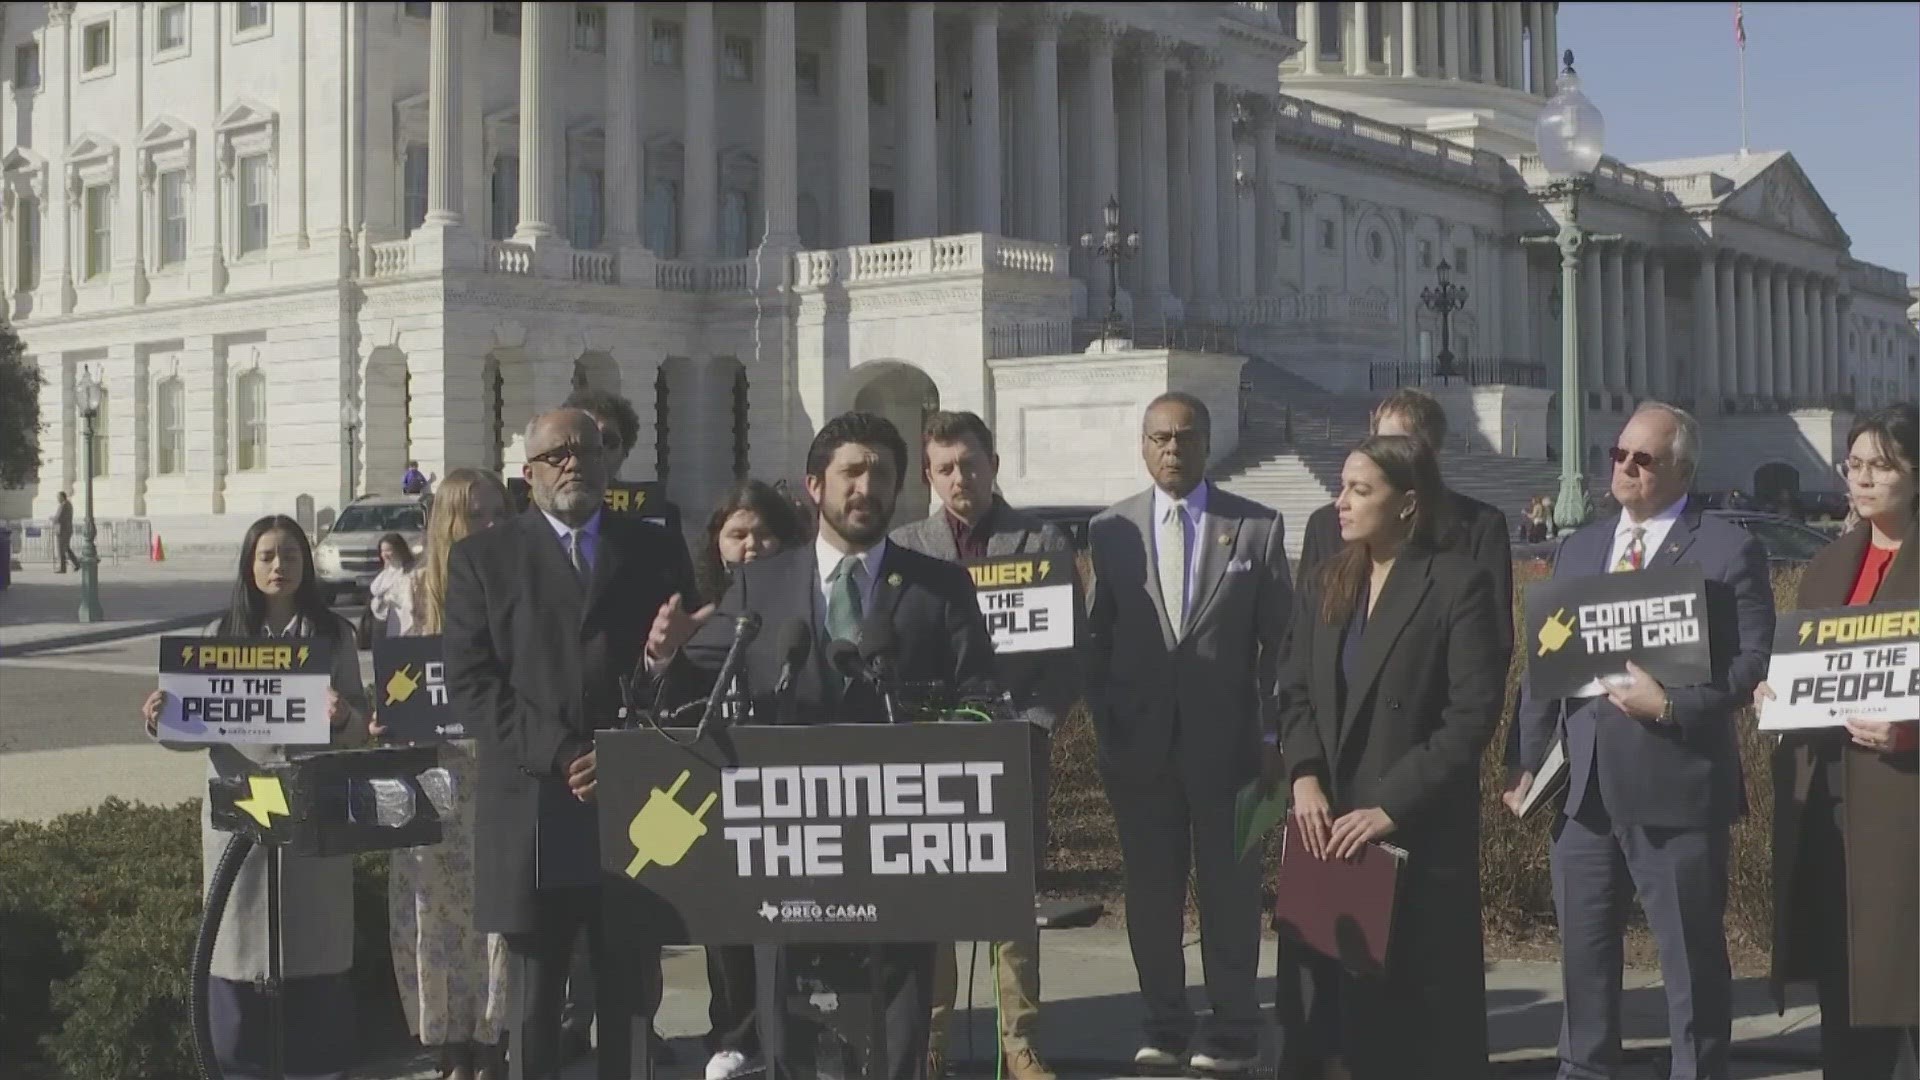 Rep. Greg Casar, D-Austin, and Rep. Alexandria Ocasio-Cortez, D-New York, Wednesday announced the bill called the “Connect the Grid Act.”